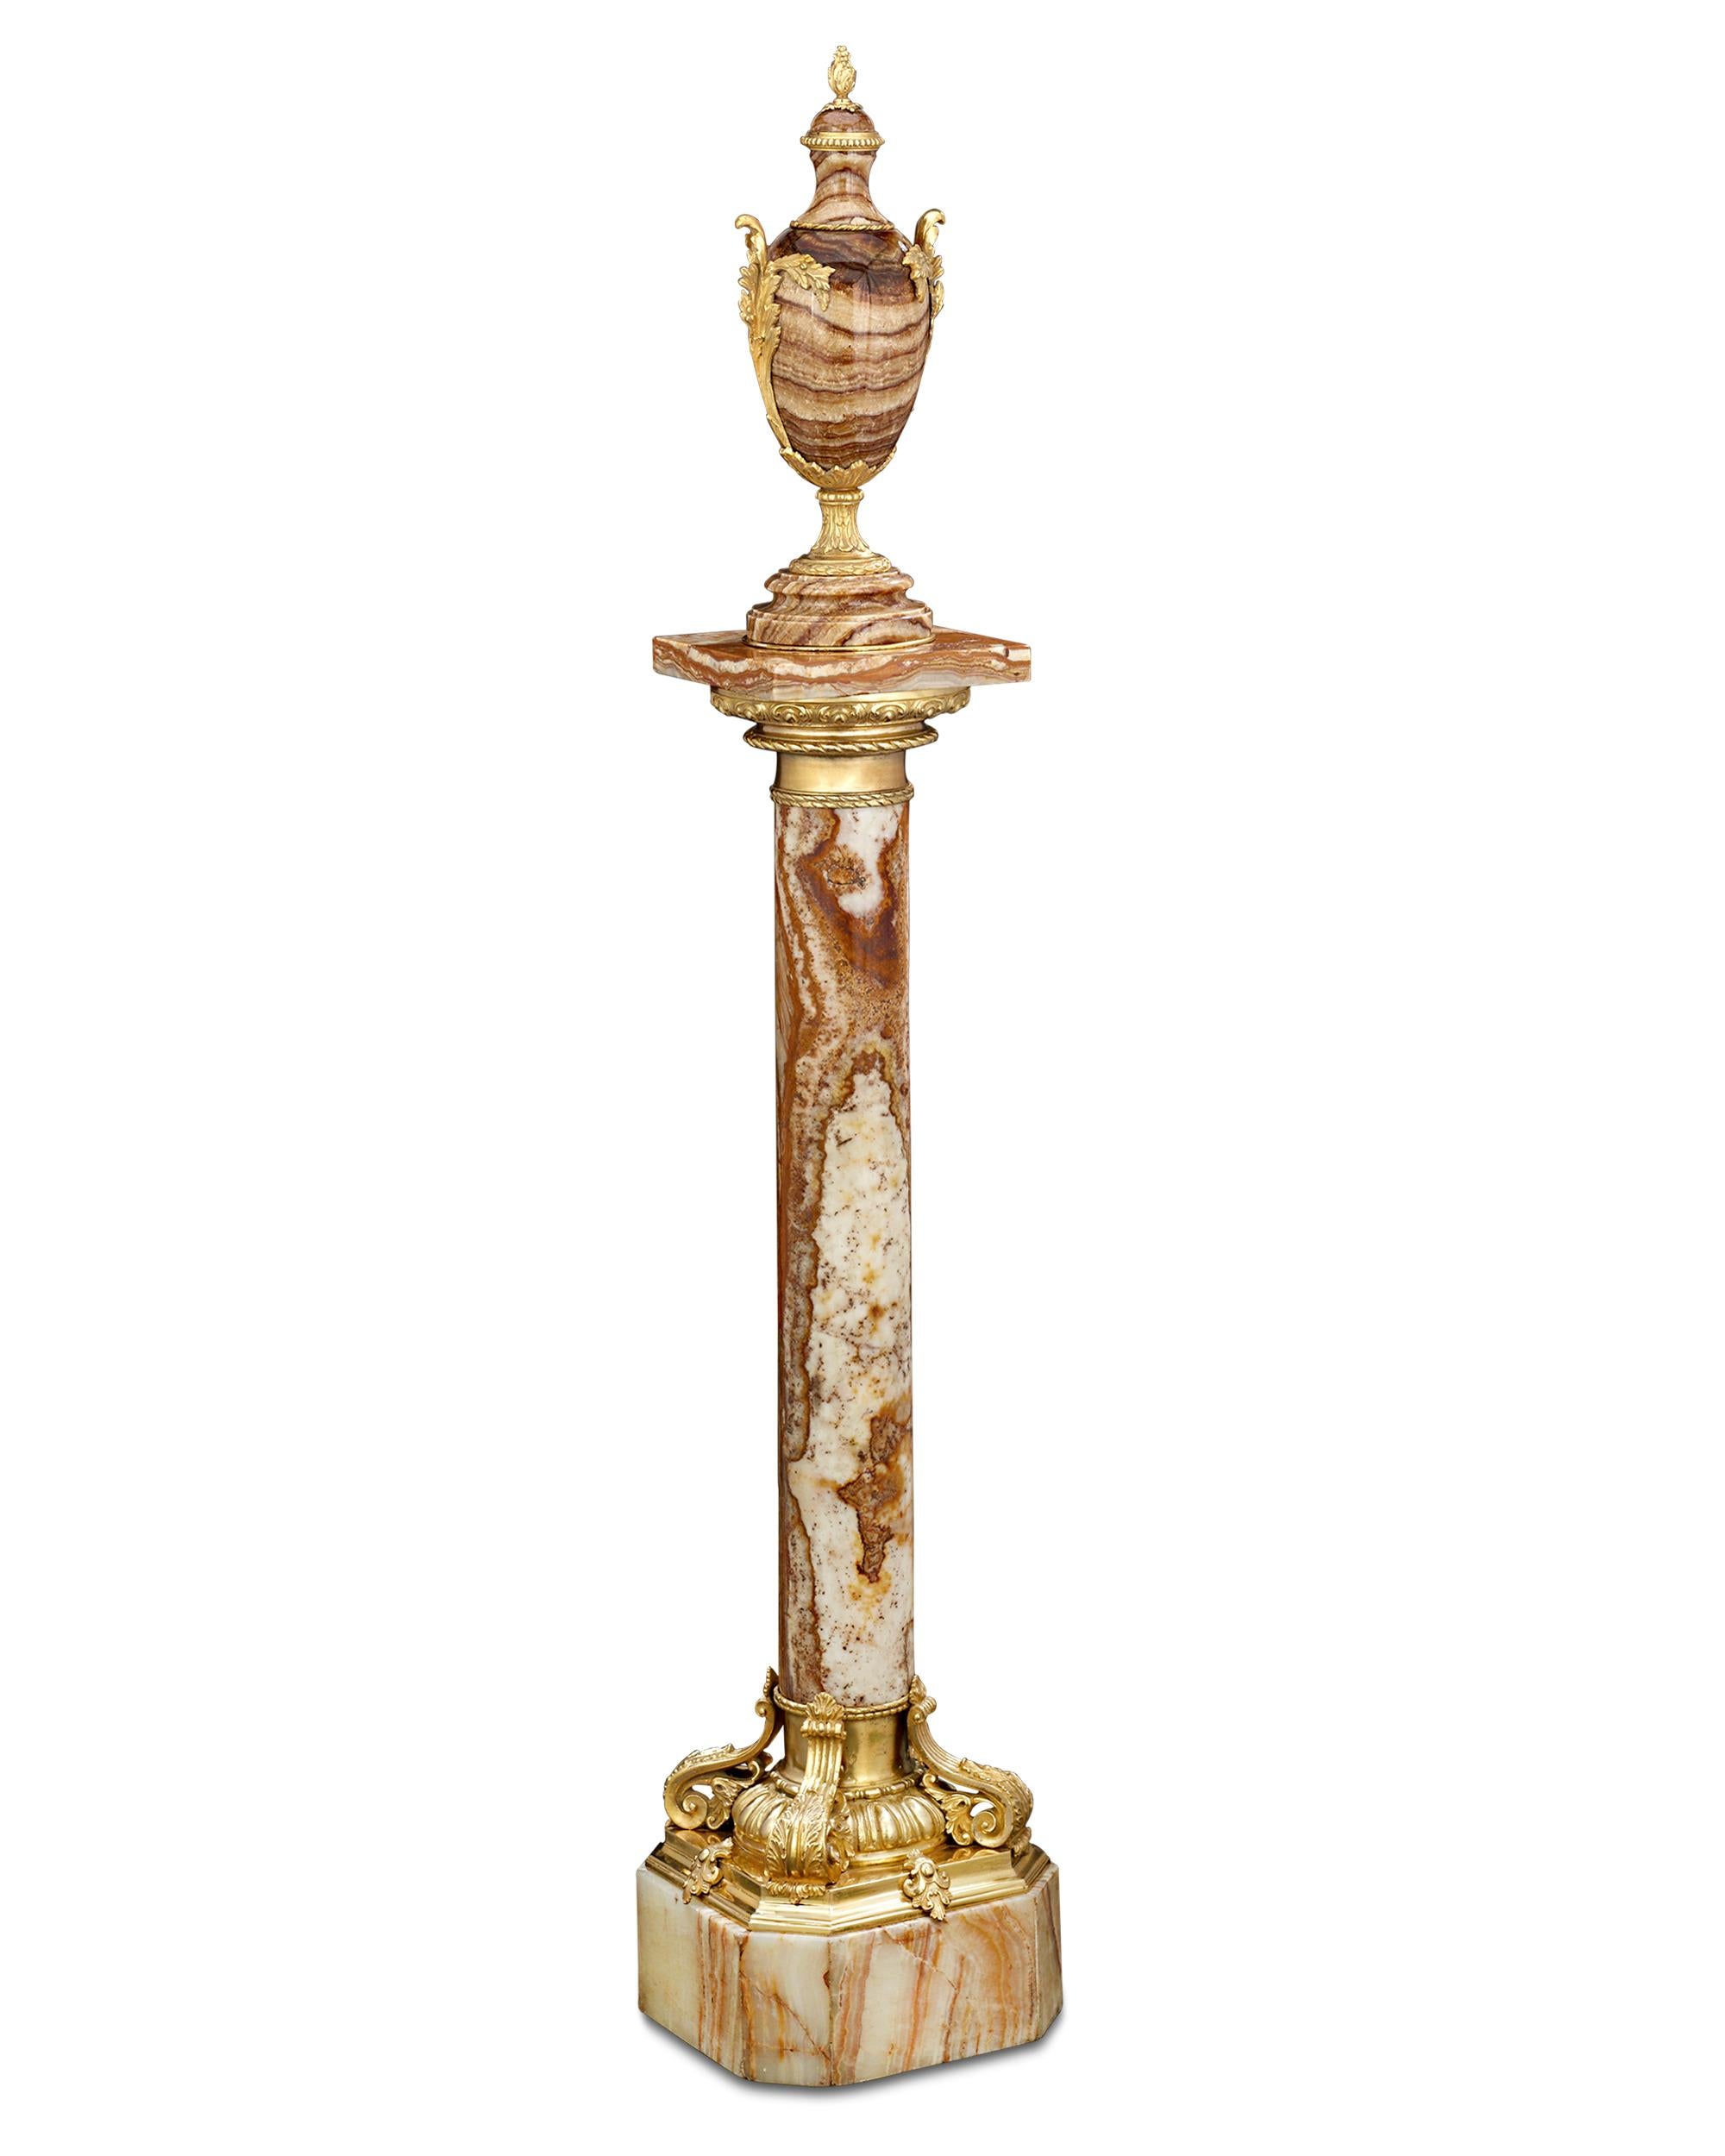 This exquisite Italian pedestal and urn, masterfully crafted from the esteemed Alabastro Fiorito Antico marble, represents the very finest of 19th-century Italian craftsmanship. Alabastro Fiorito Antico marble is one of the most sought-after and